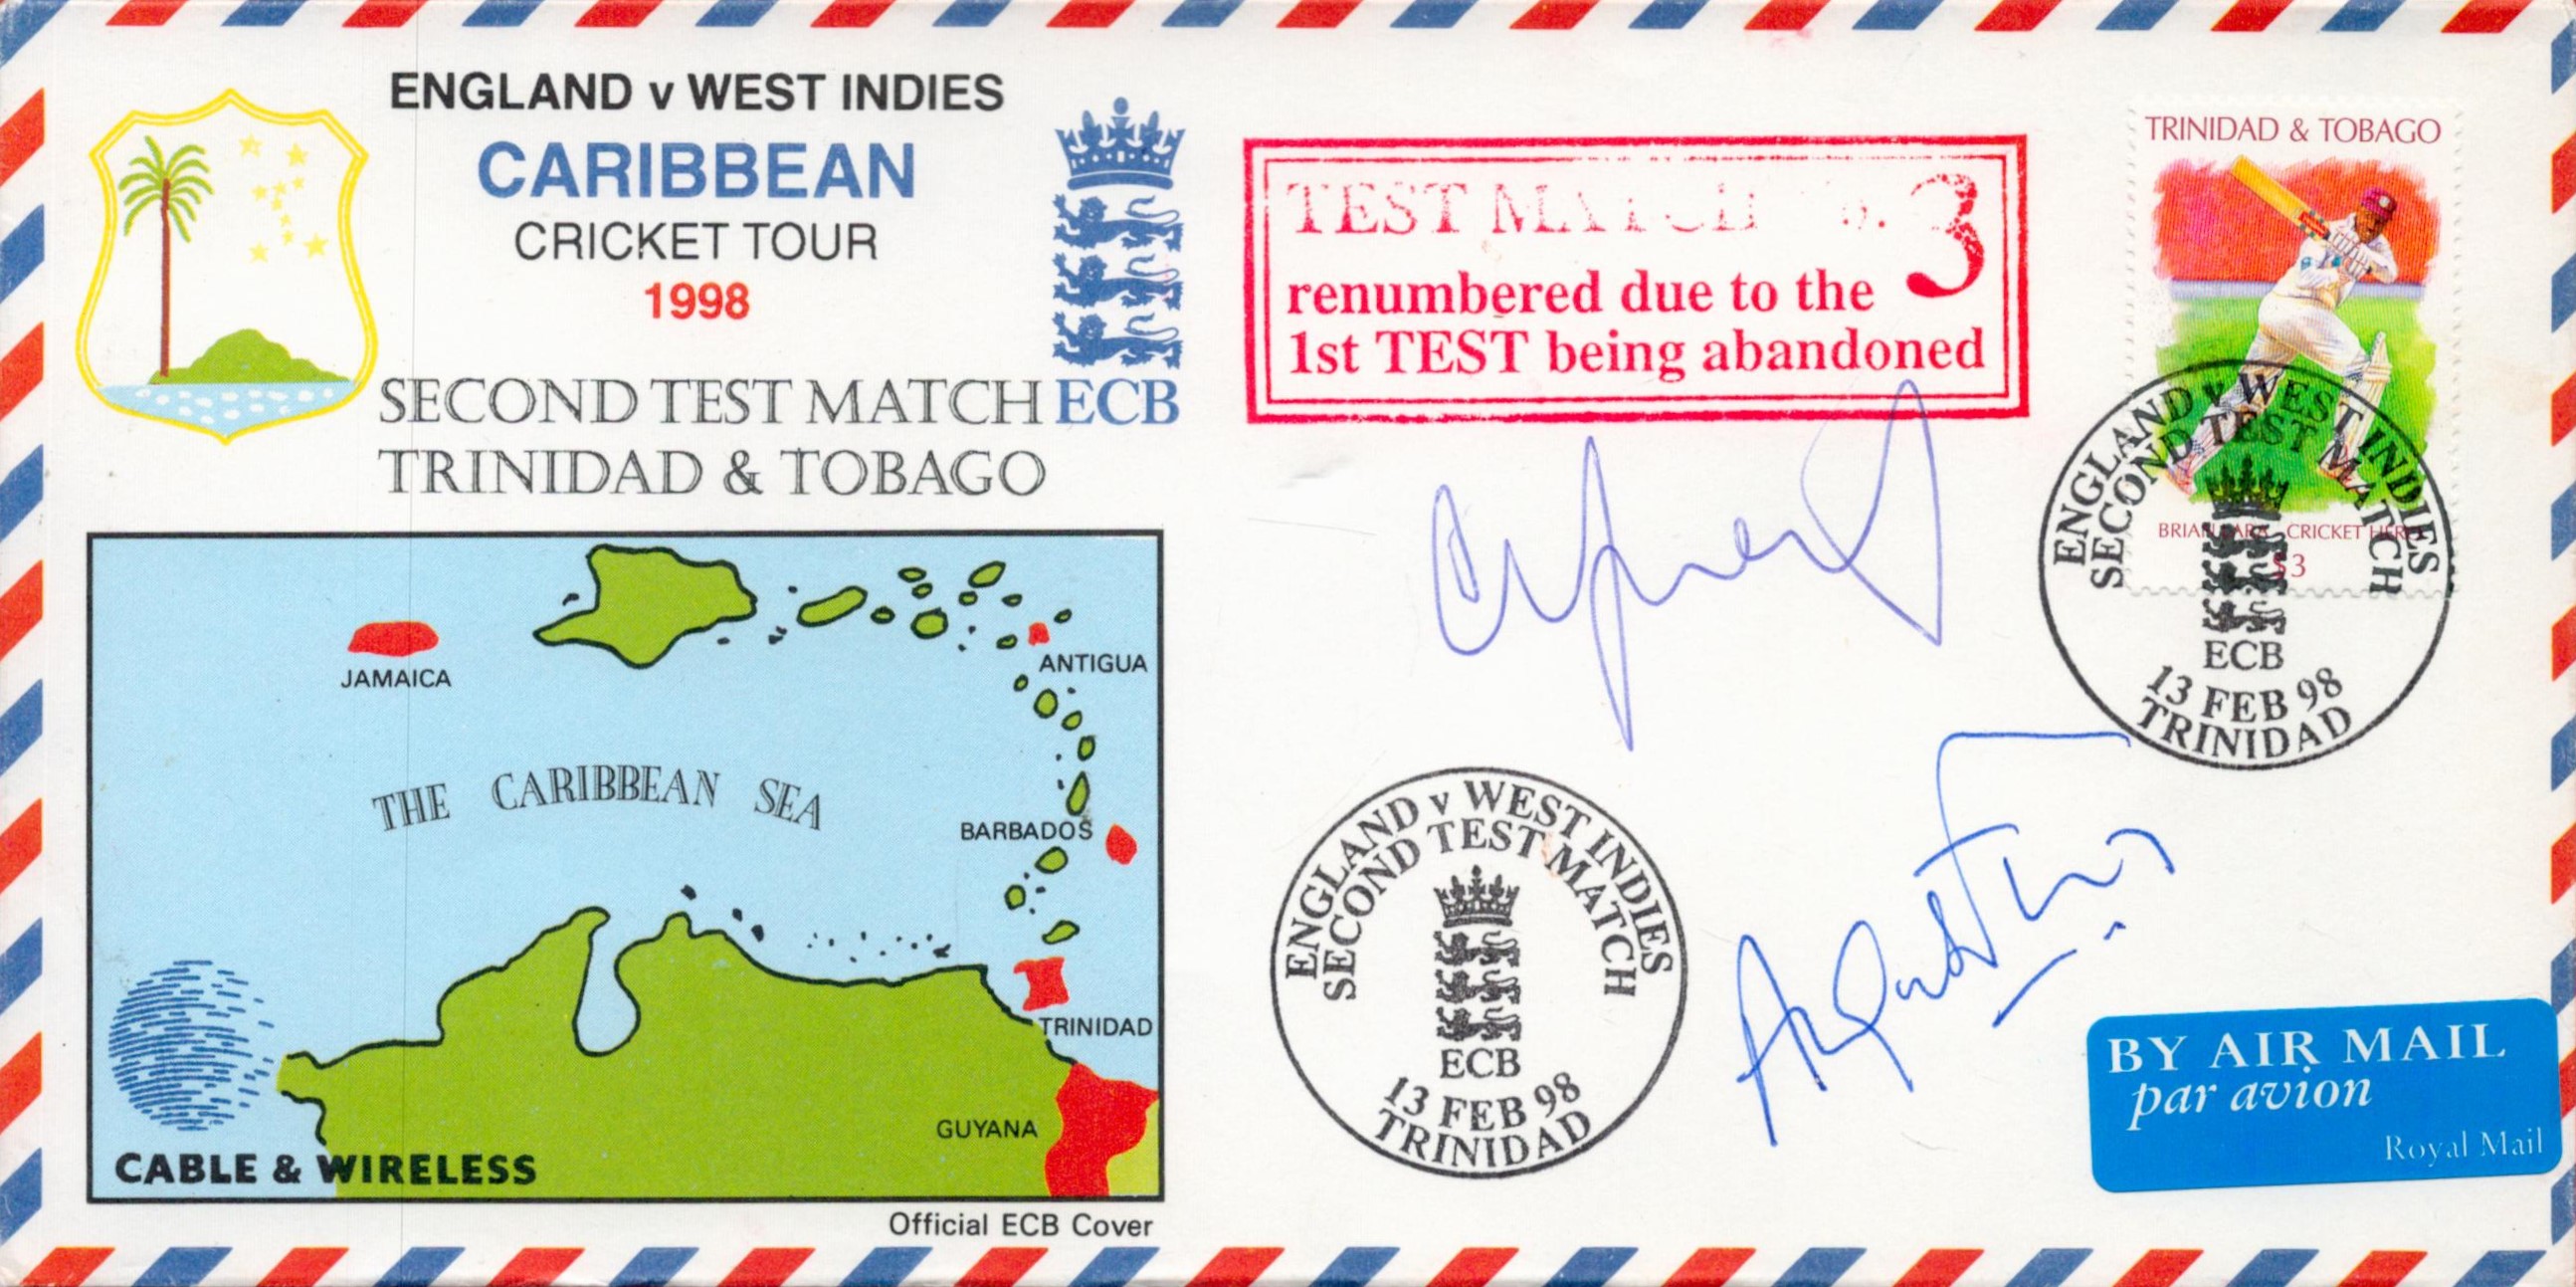 Cricket England v West Indies Caribbean Tour 1998 Second Test Match Trinidad and Tobago multi signed